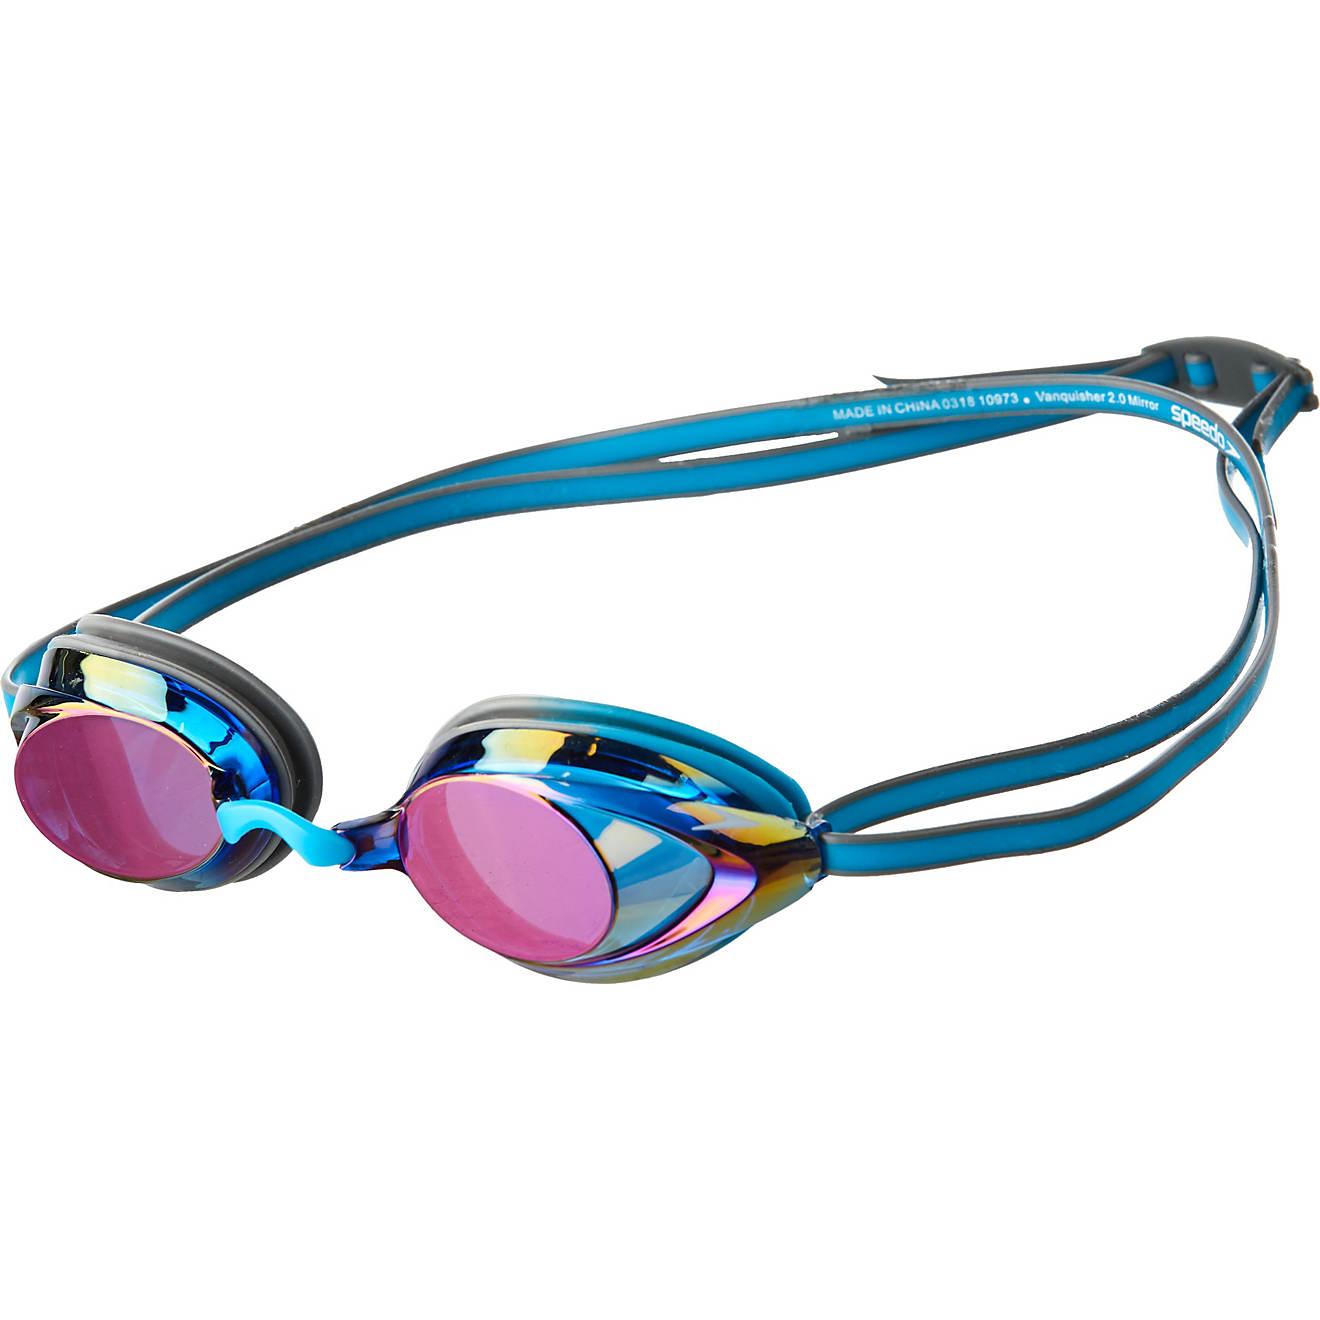 Speedo Adults' Vanquisher 2.0 Mirrored Goggles                                                                                   - view number 1